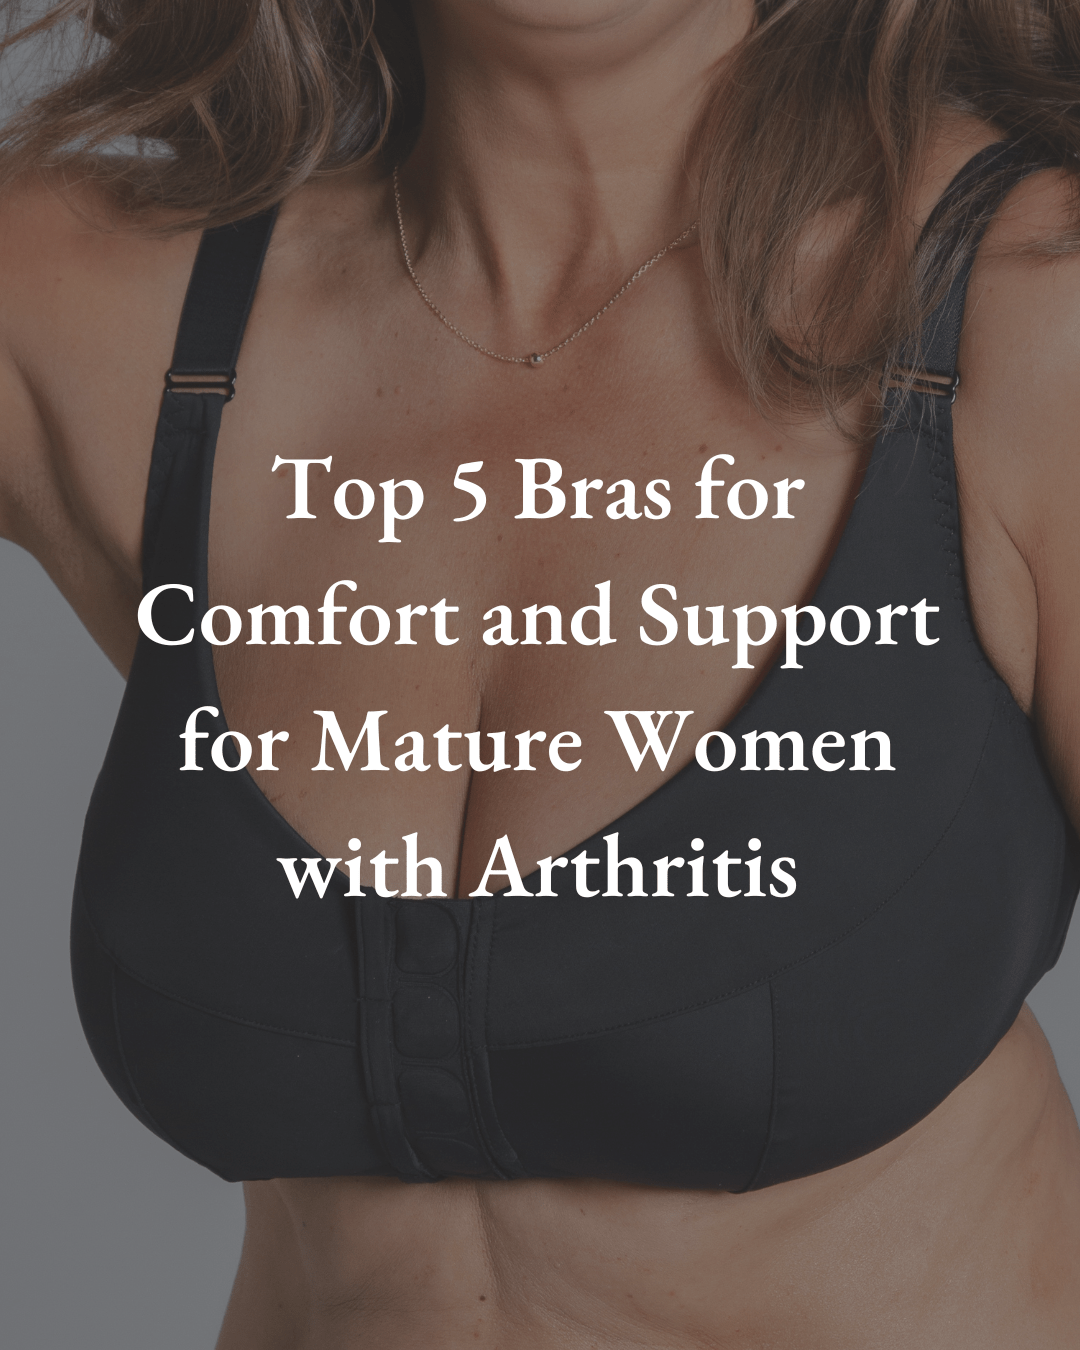 Top 5 Bras for Comfort and Support for Mature Women with Arthritis